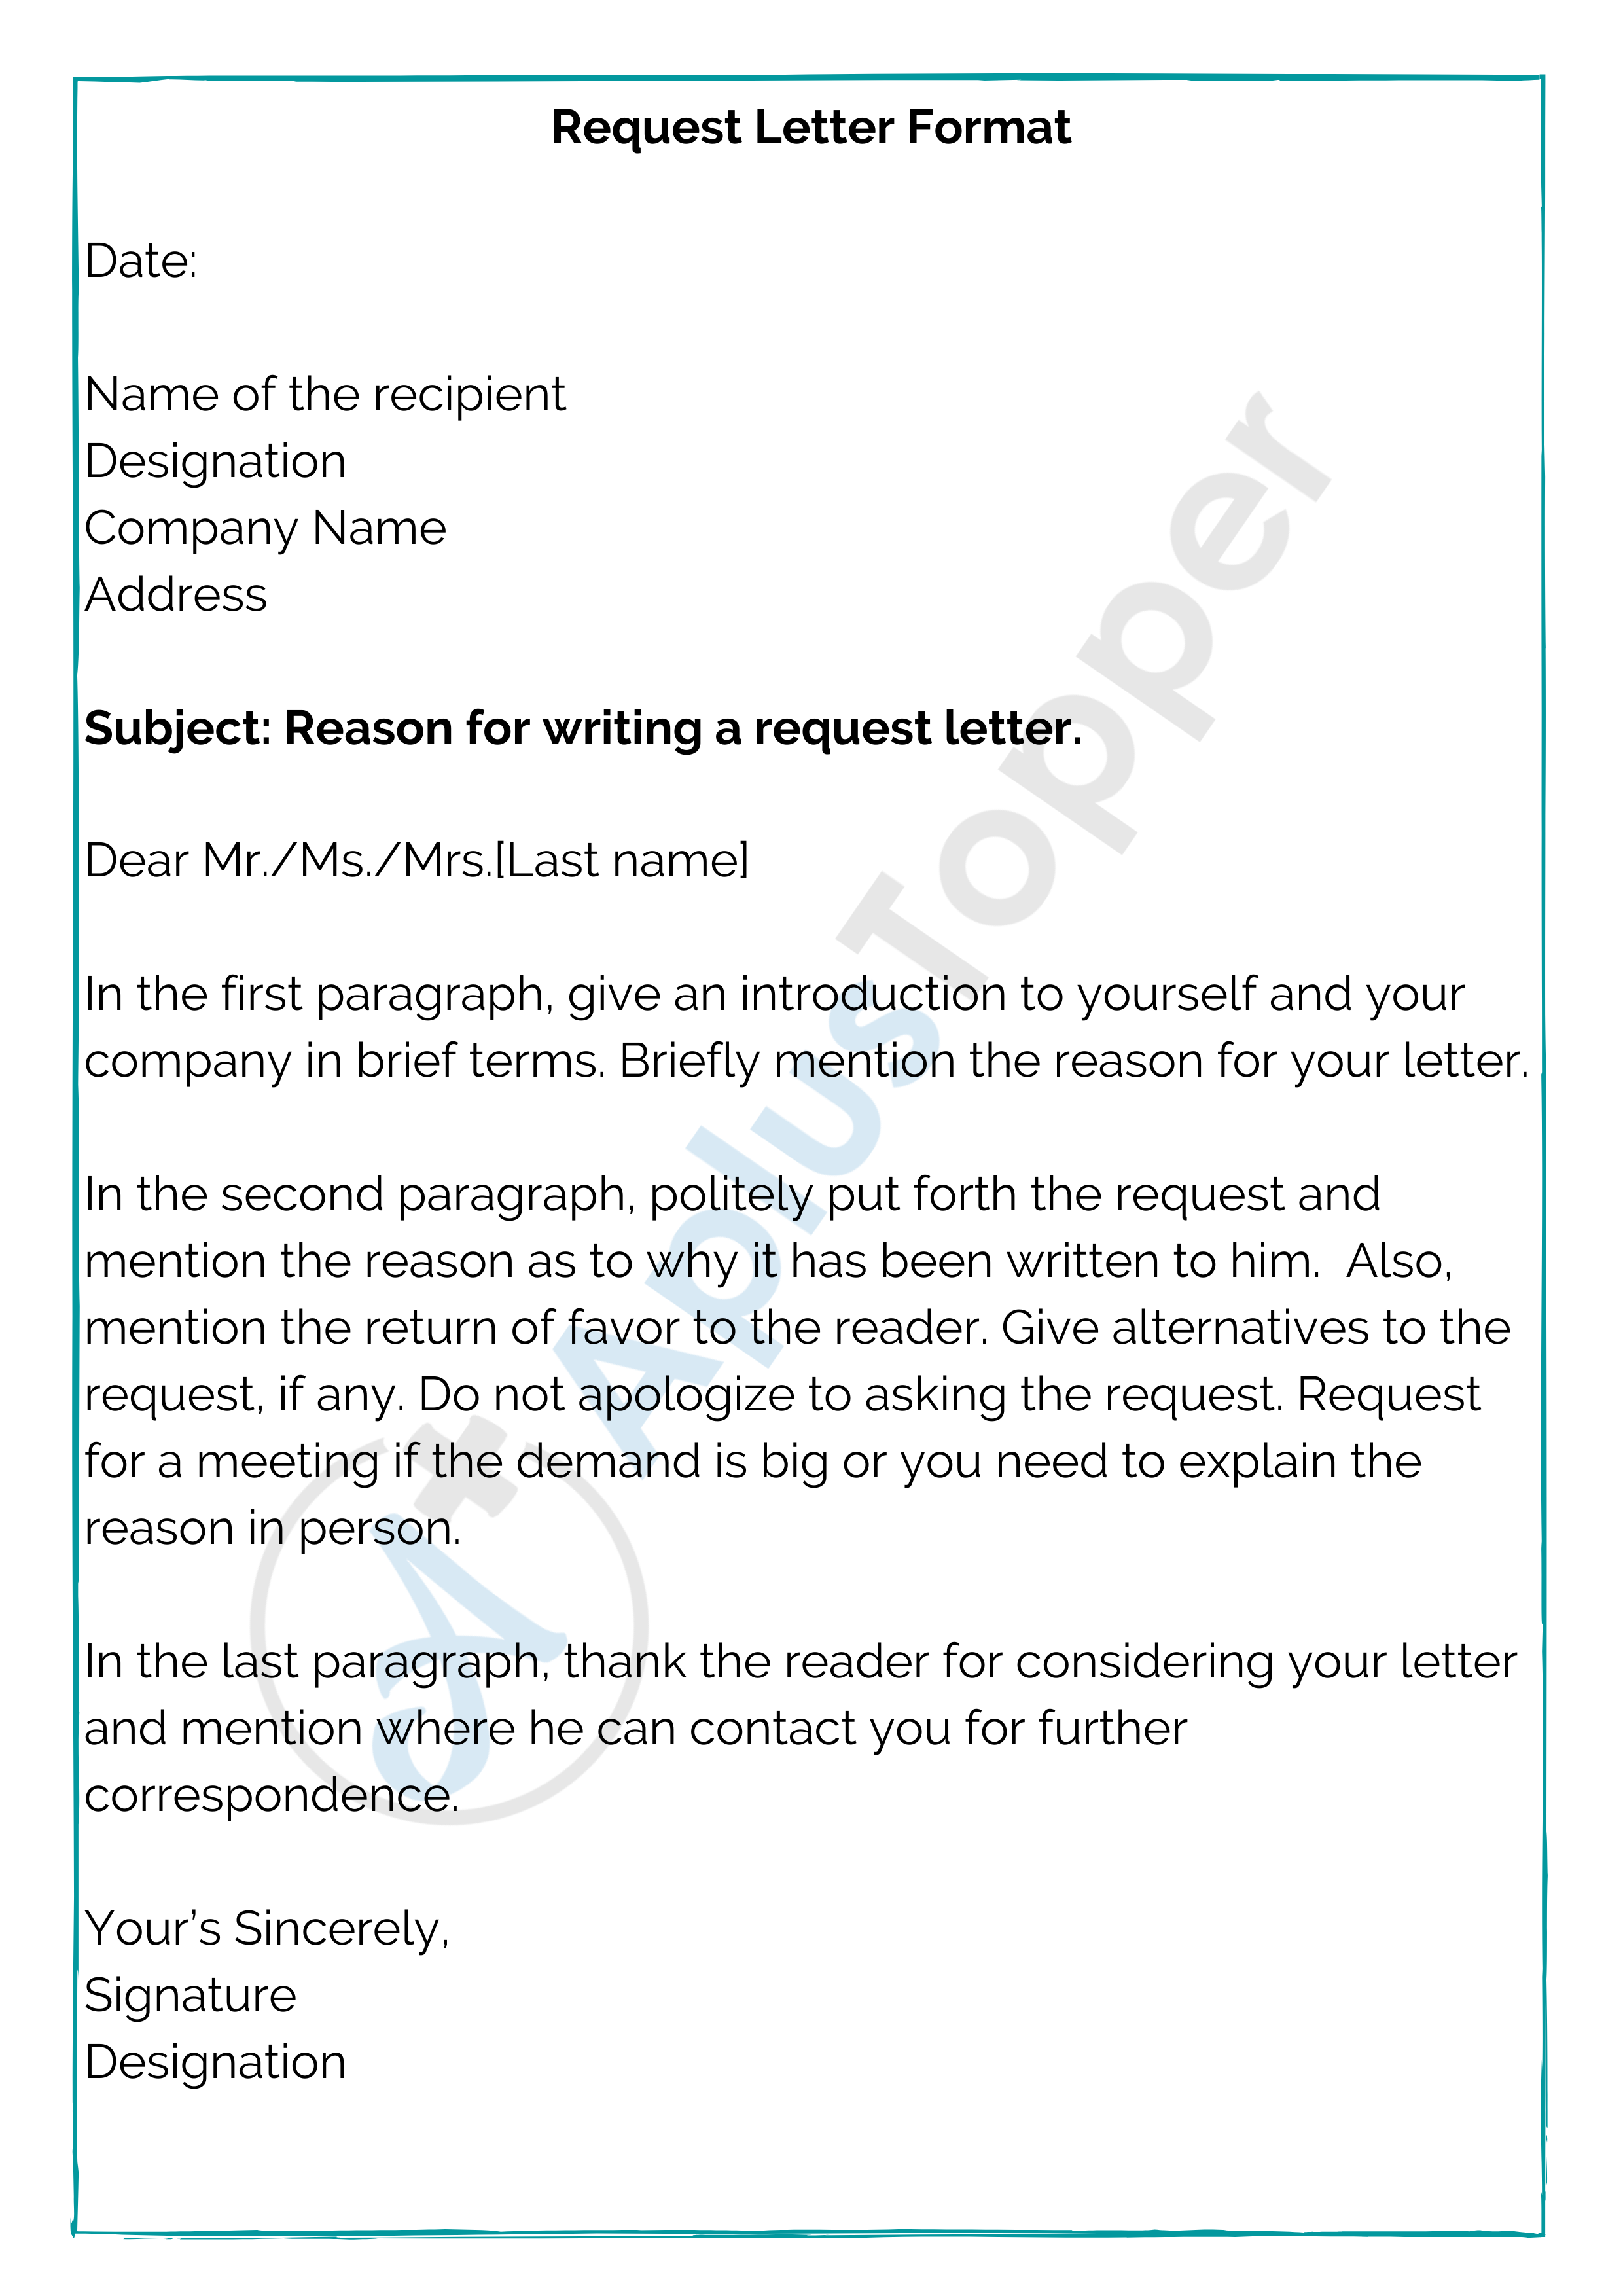 write a request letter to